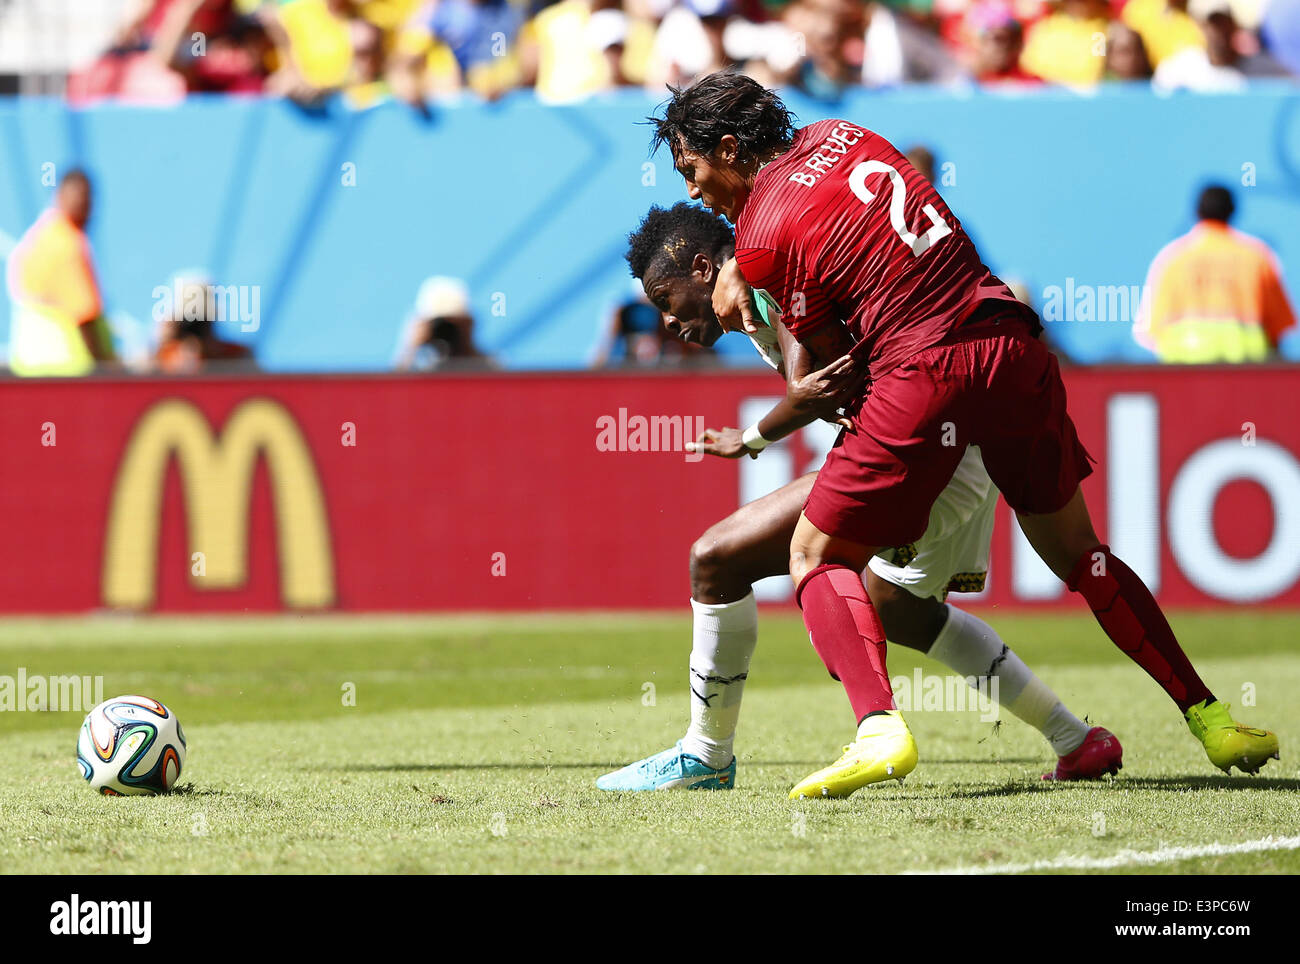 Brasilia, Brazil. 26th June, 2014. Portugal's Bruno Alves (R) vies for the ball during a Group G match between Portugal and Ghana of 2014 FIFA World Cup at the Estadio Nacional Stadium in Brasilia, Brazil, June 26, 2014. Credit:  Liu Bin/Xinhua/Alamy Live News Stock Photo